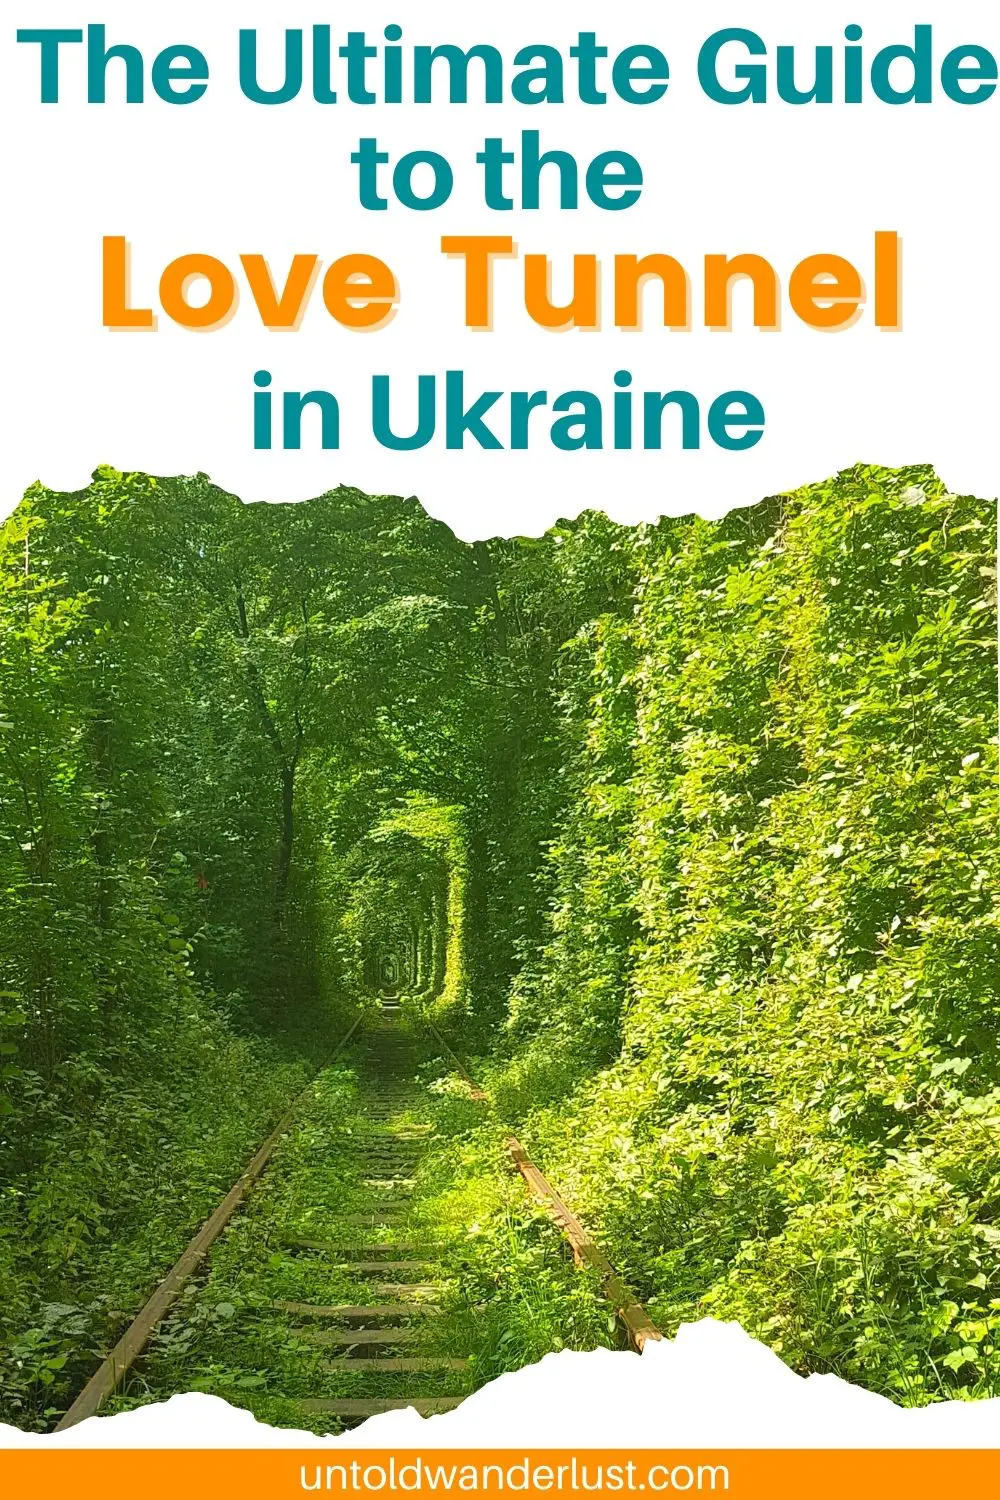 How to Get to the Love Tunnel in Ukraine